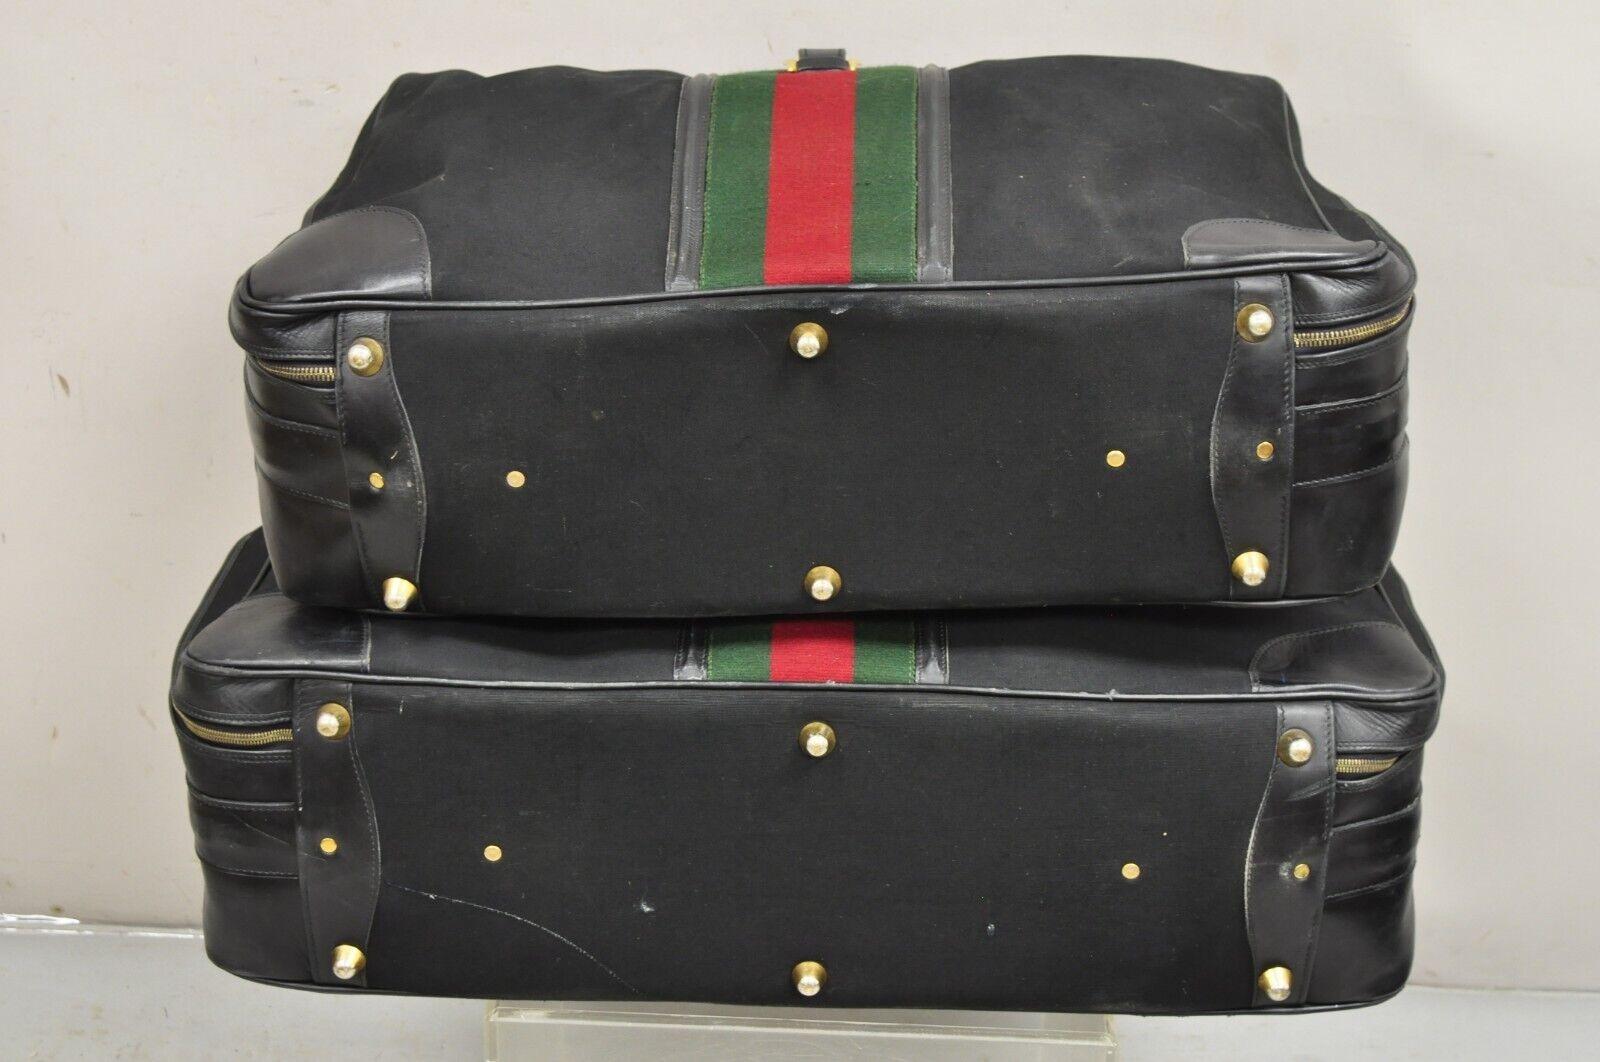 Vintage Gucci Black Canvas & Leather Suitcase Luggage His and Hers Set -2 Pc (B) For Sale 5